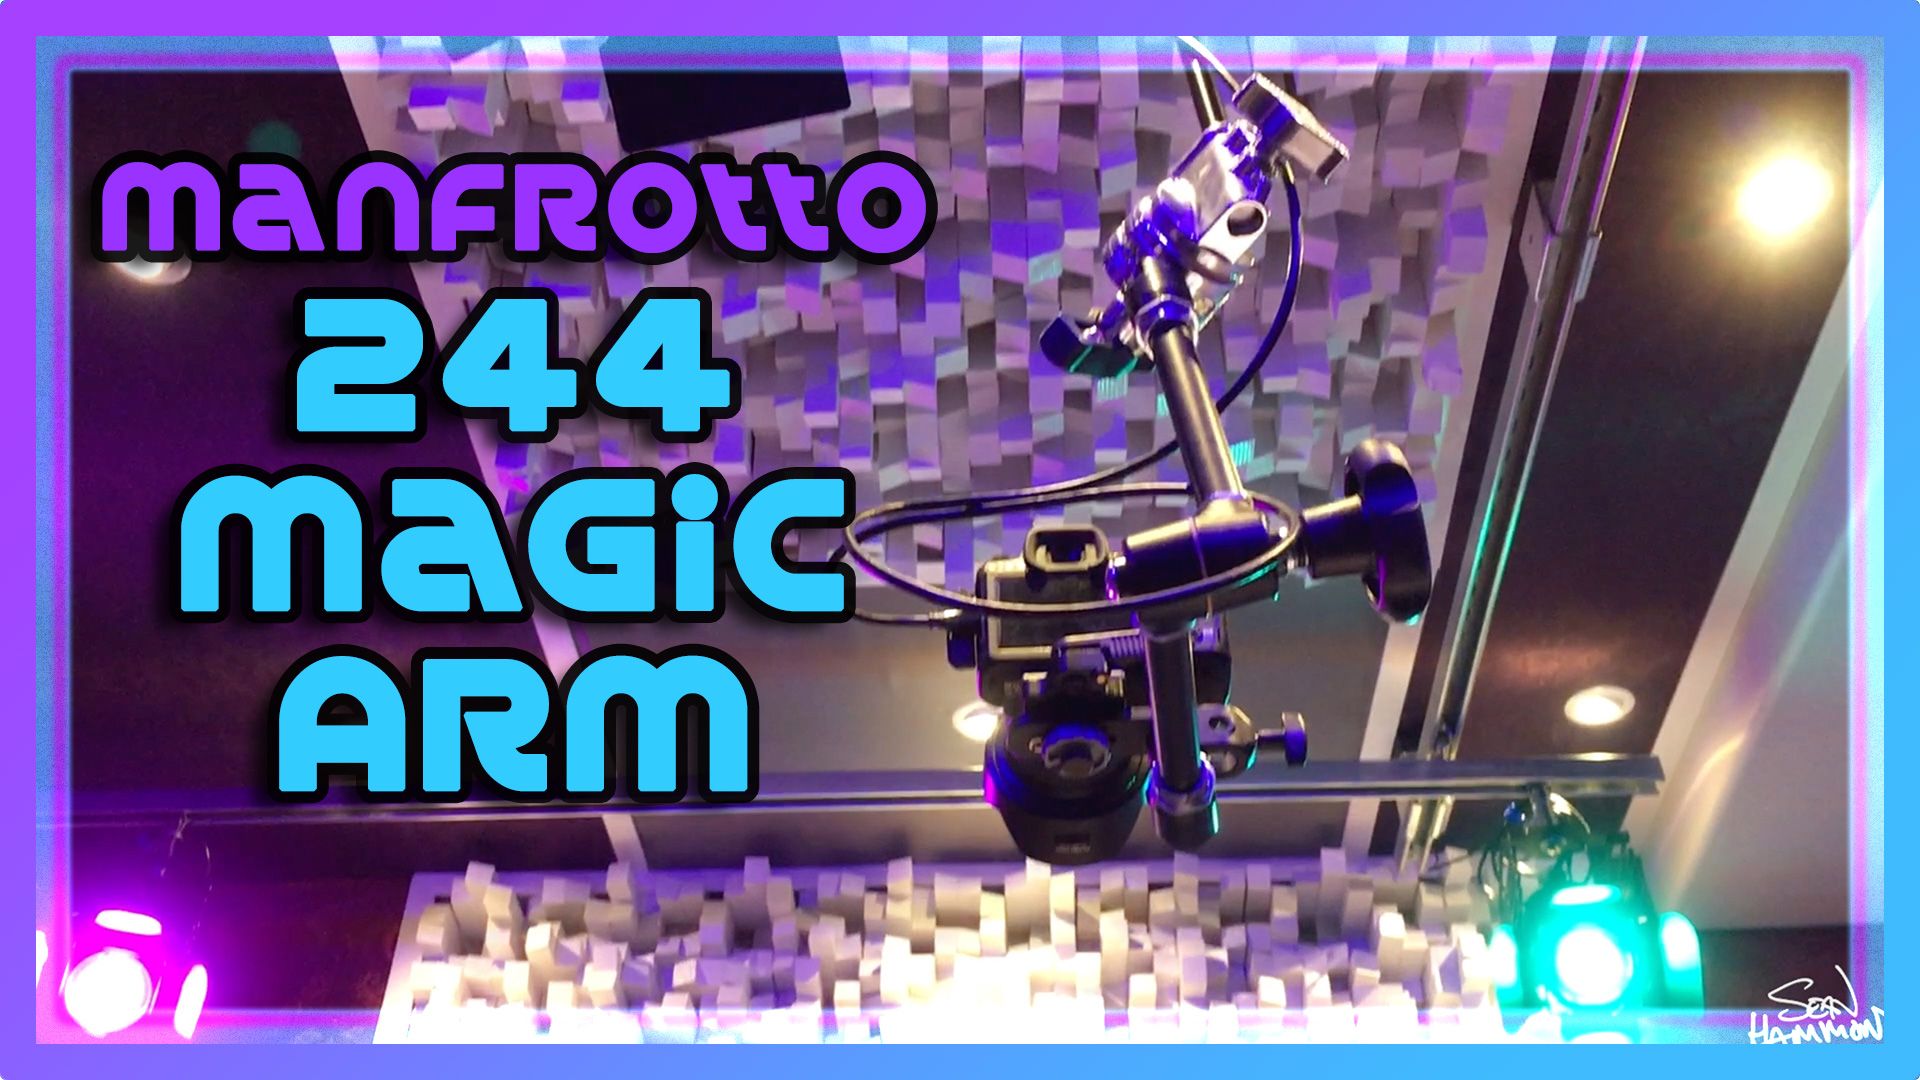 Manfrotto 244 Magic Arm Video Review